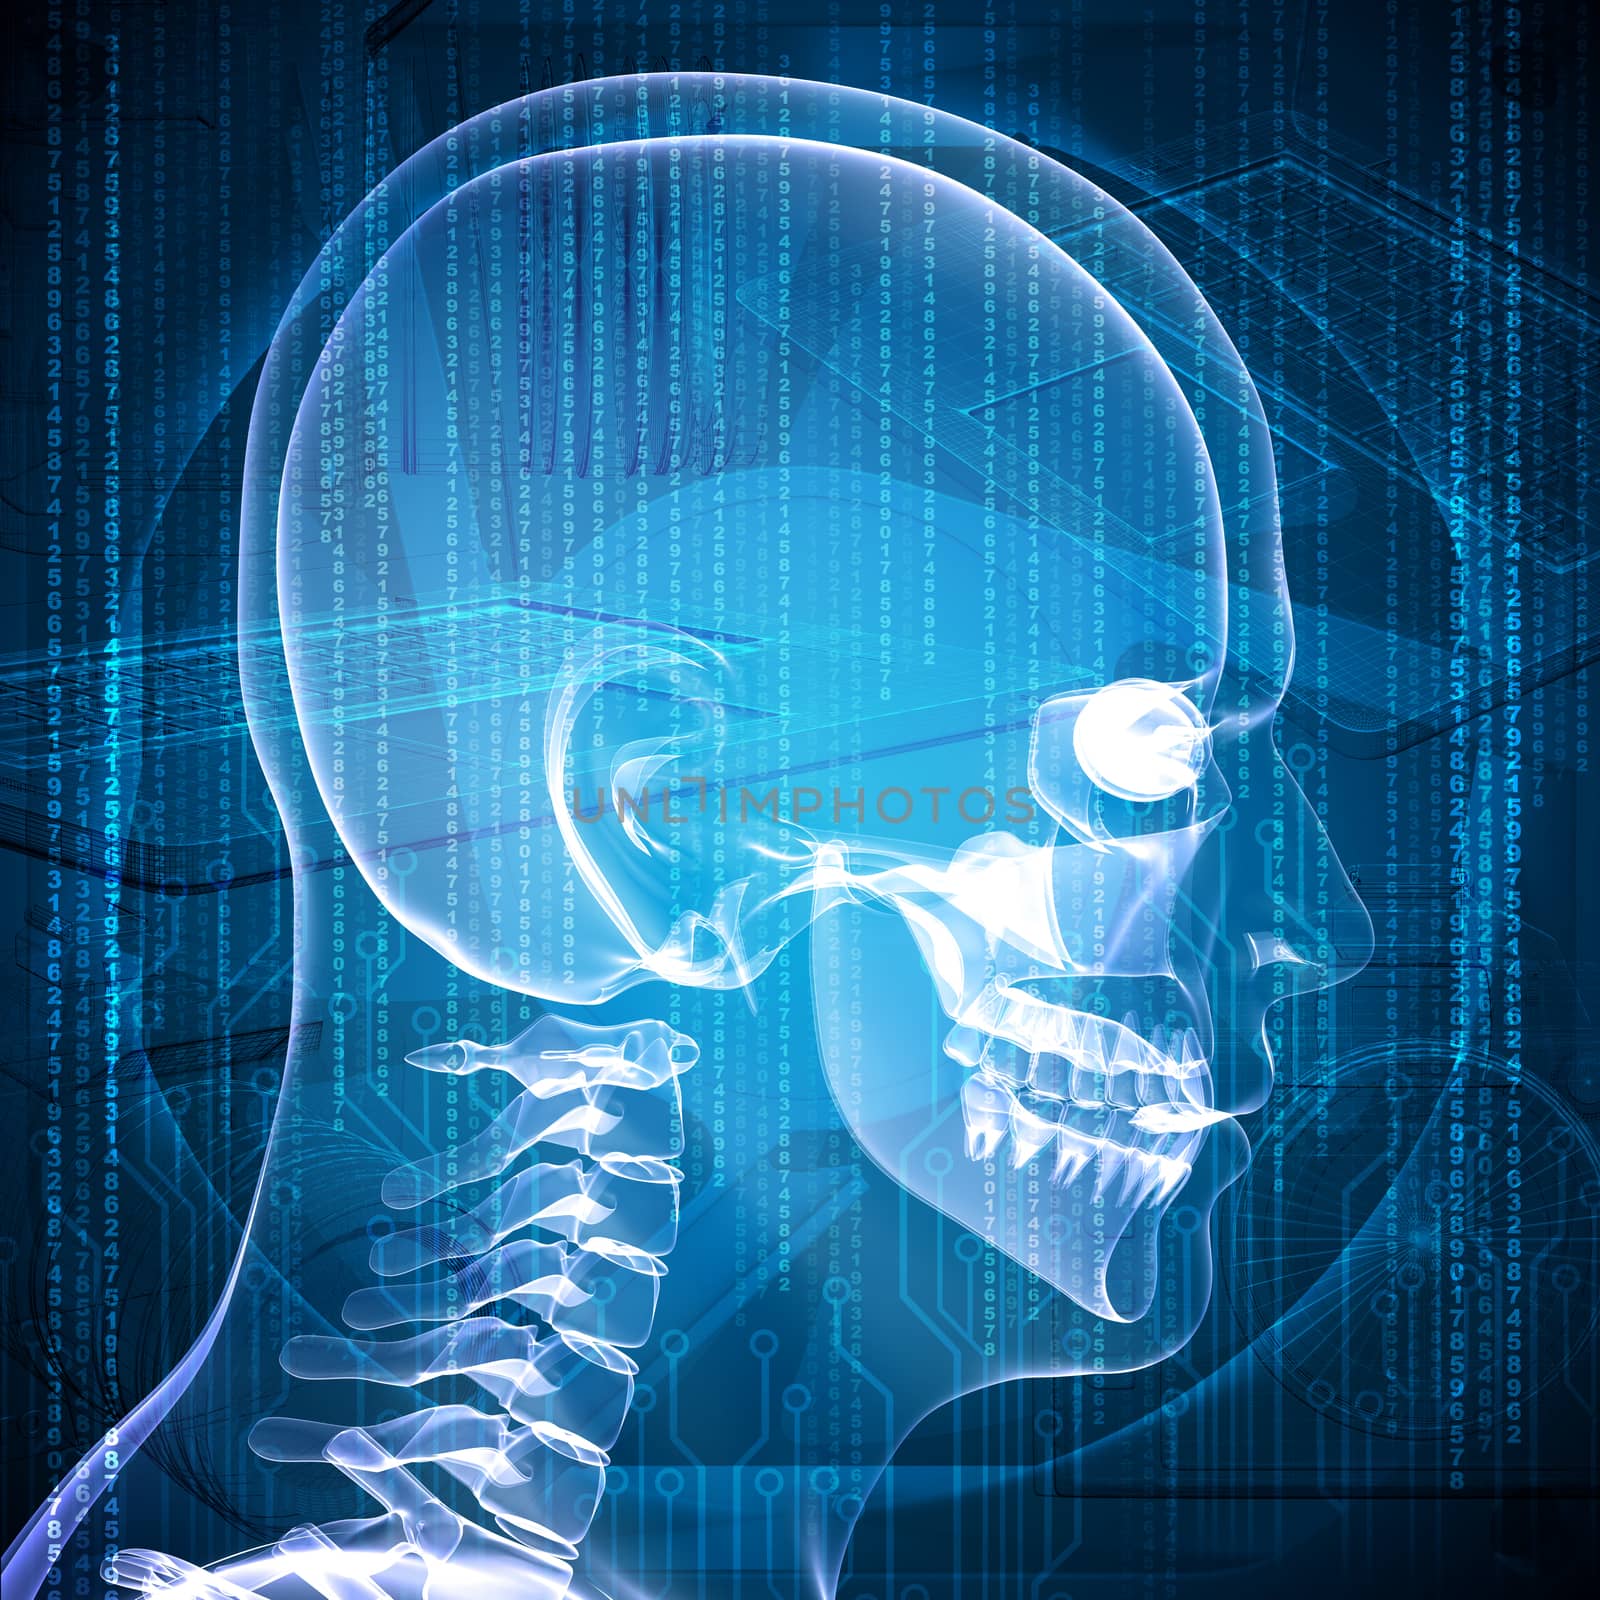 X-ray image of a man's head, graphics and communication in the background